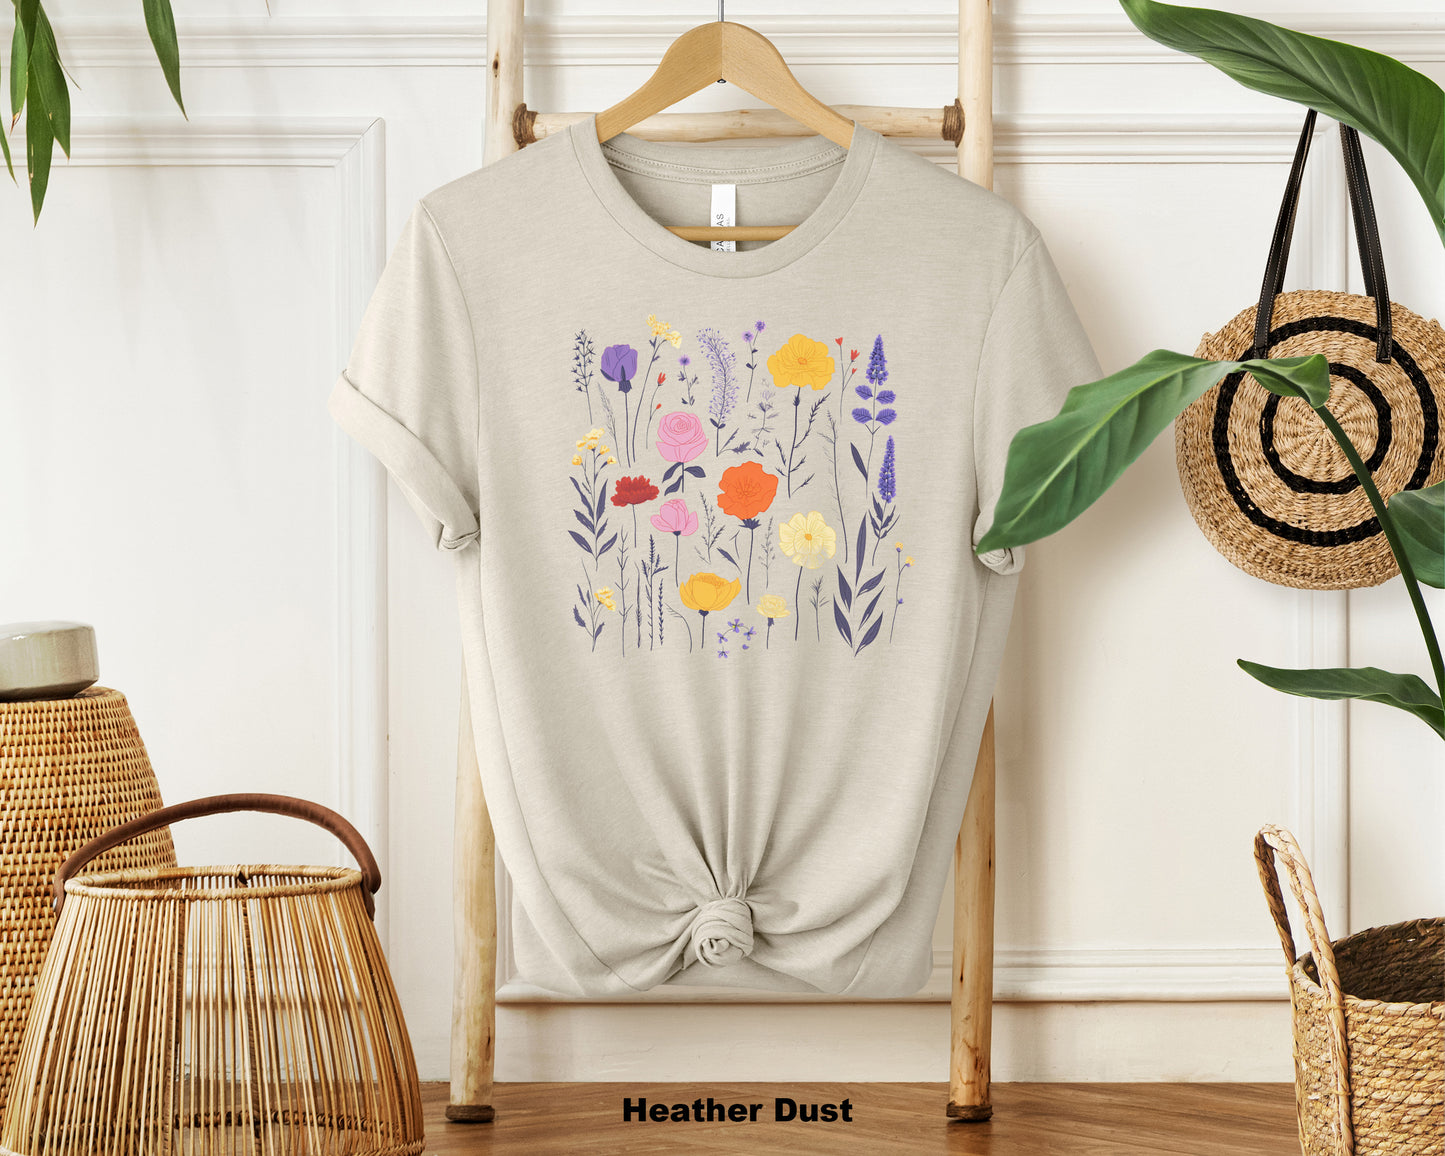 Whispering Meadows Neutral Floral Shirt - Women's Nature-Inspired Top